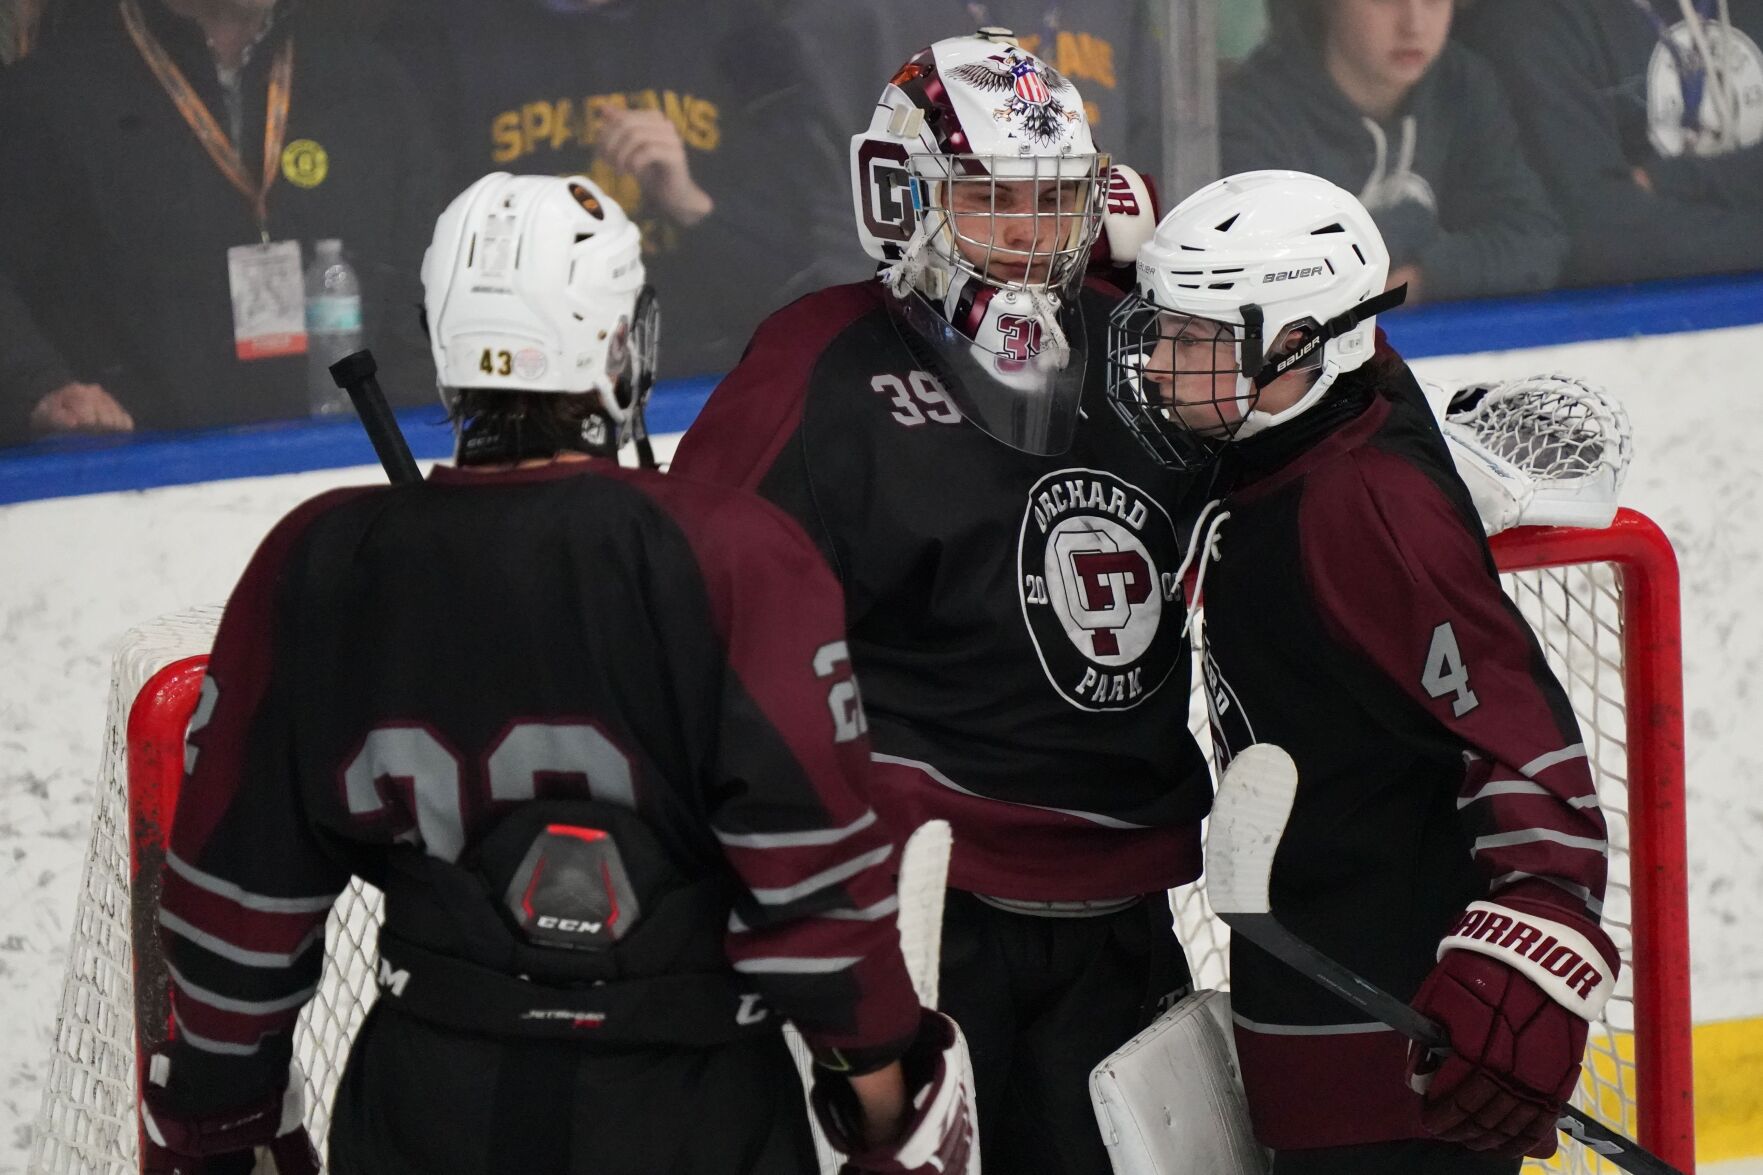 Suffern dominates Orchard Park with 6-2 win in State Final; Fourth Consecutive Victory Celebrated